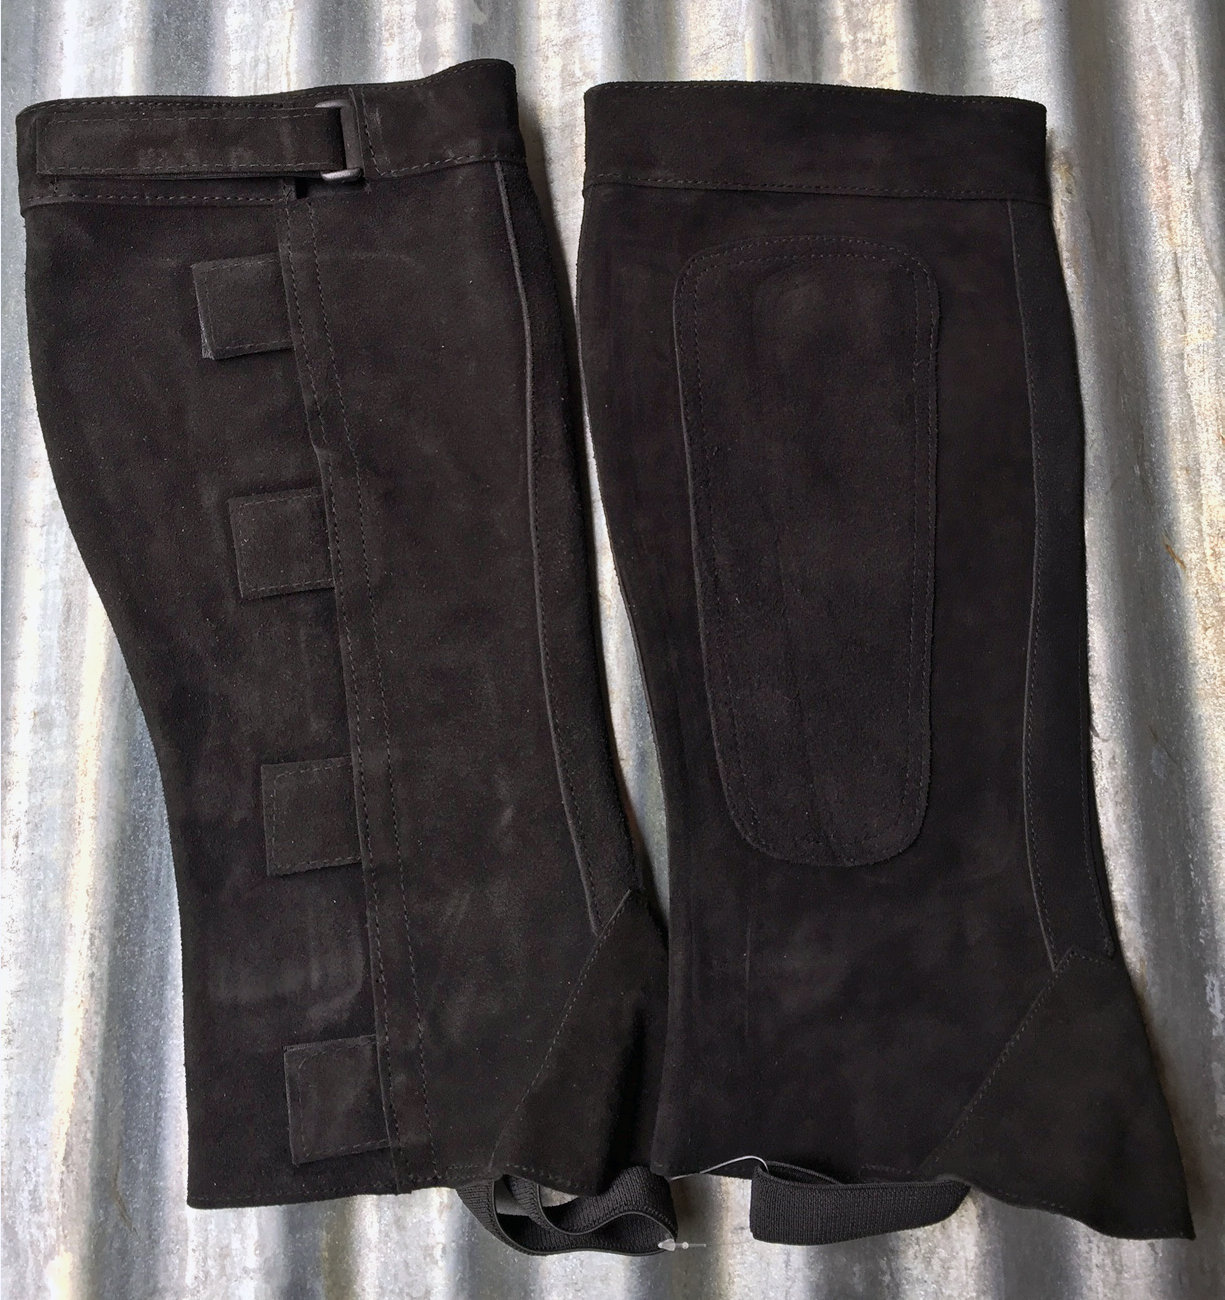 Half Chaps - Easy On Suede Black/LG